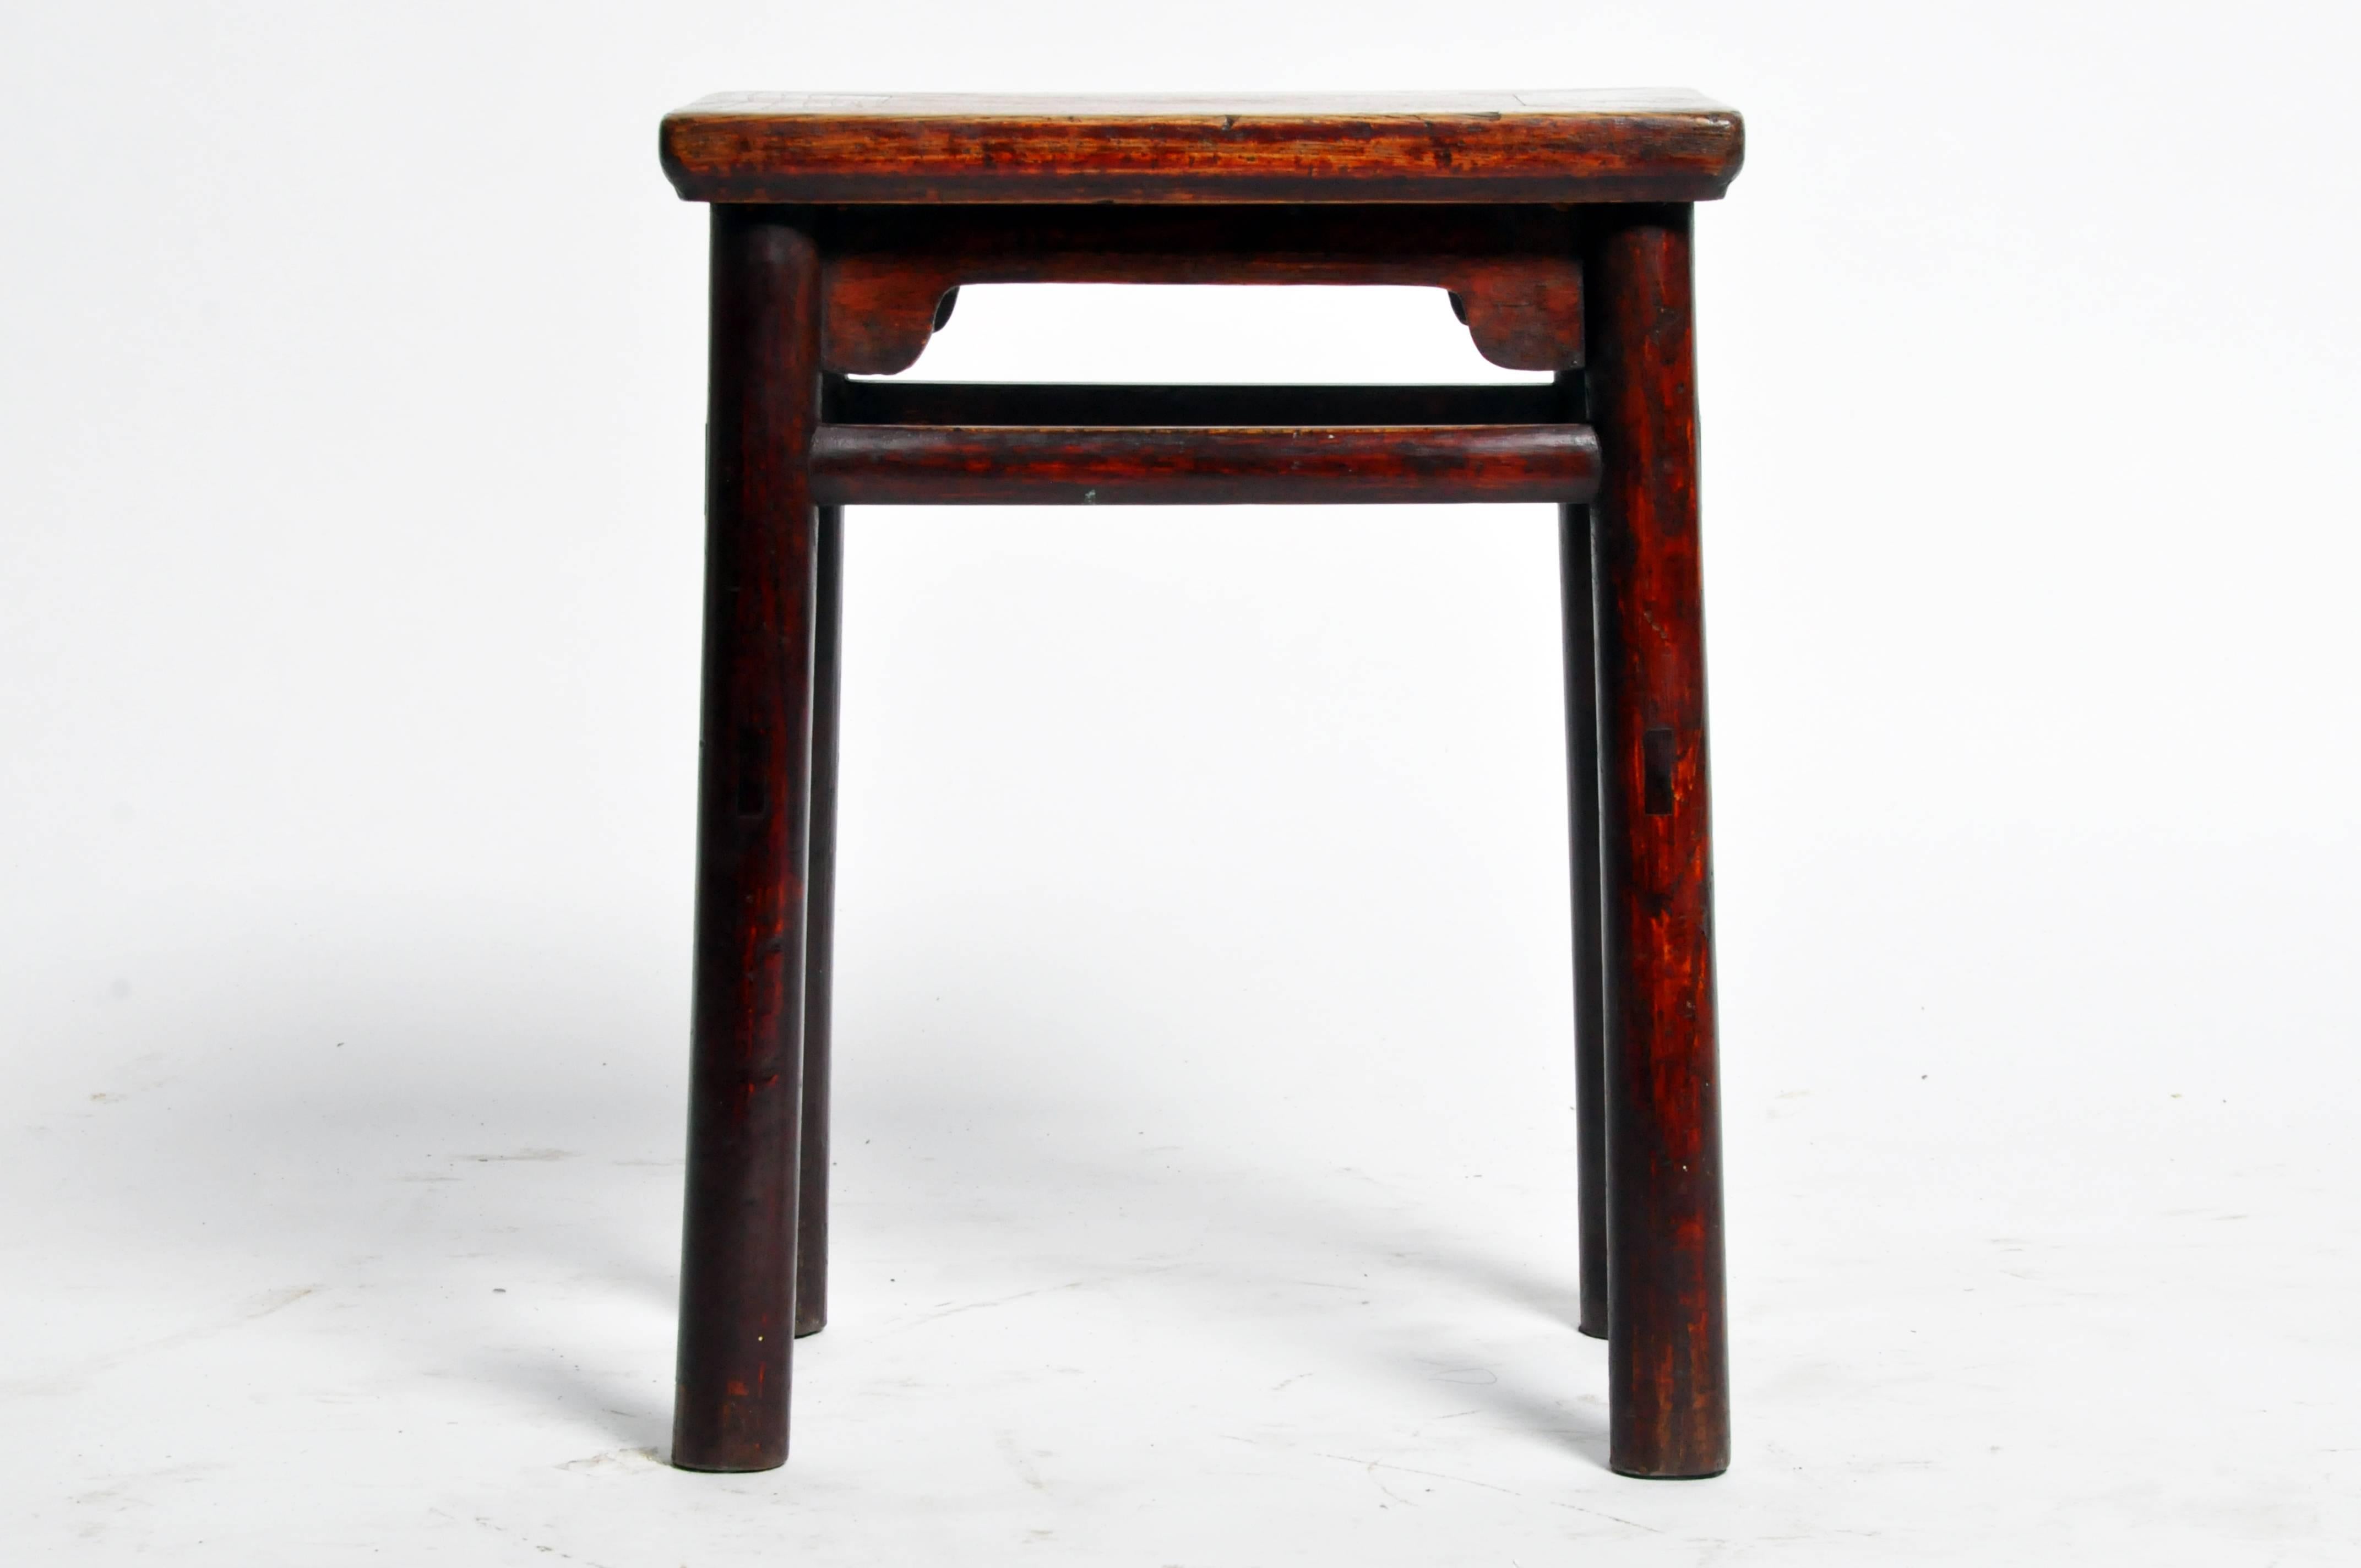 19th Century Qing Dynasty Chinese Stool with Round Legs and Original Lacquer